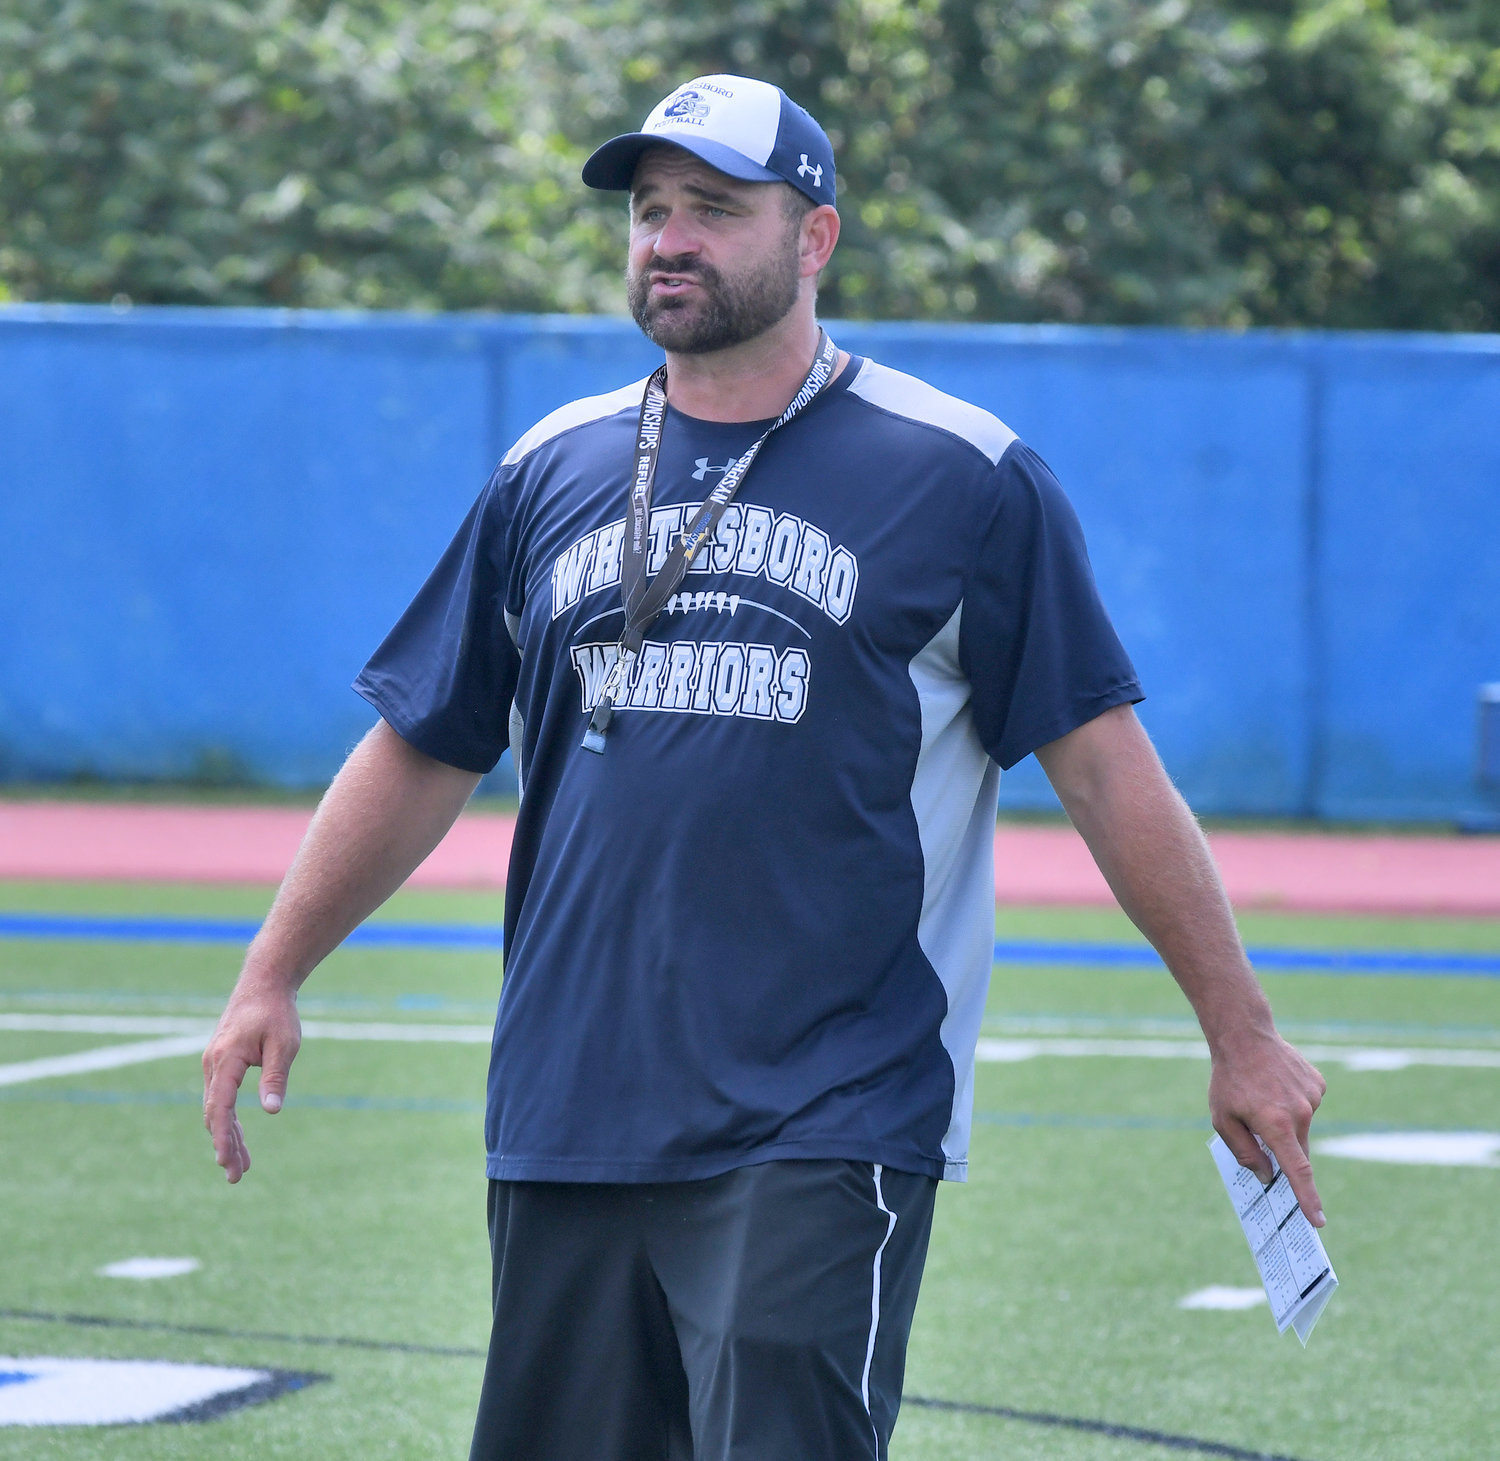 Whitesboro head football coach Curtis Schmidt leads practice in the preseason. Schmidt is entering his fourth season at the helm for the Warriors.